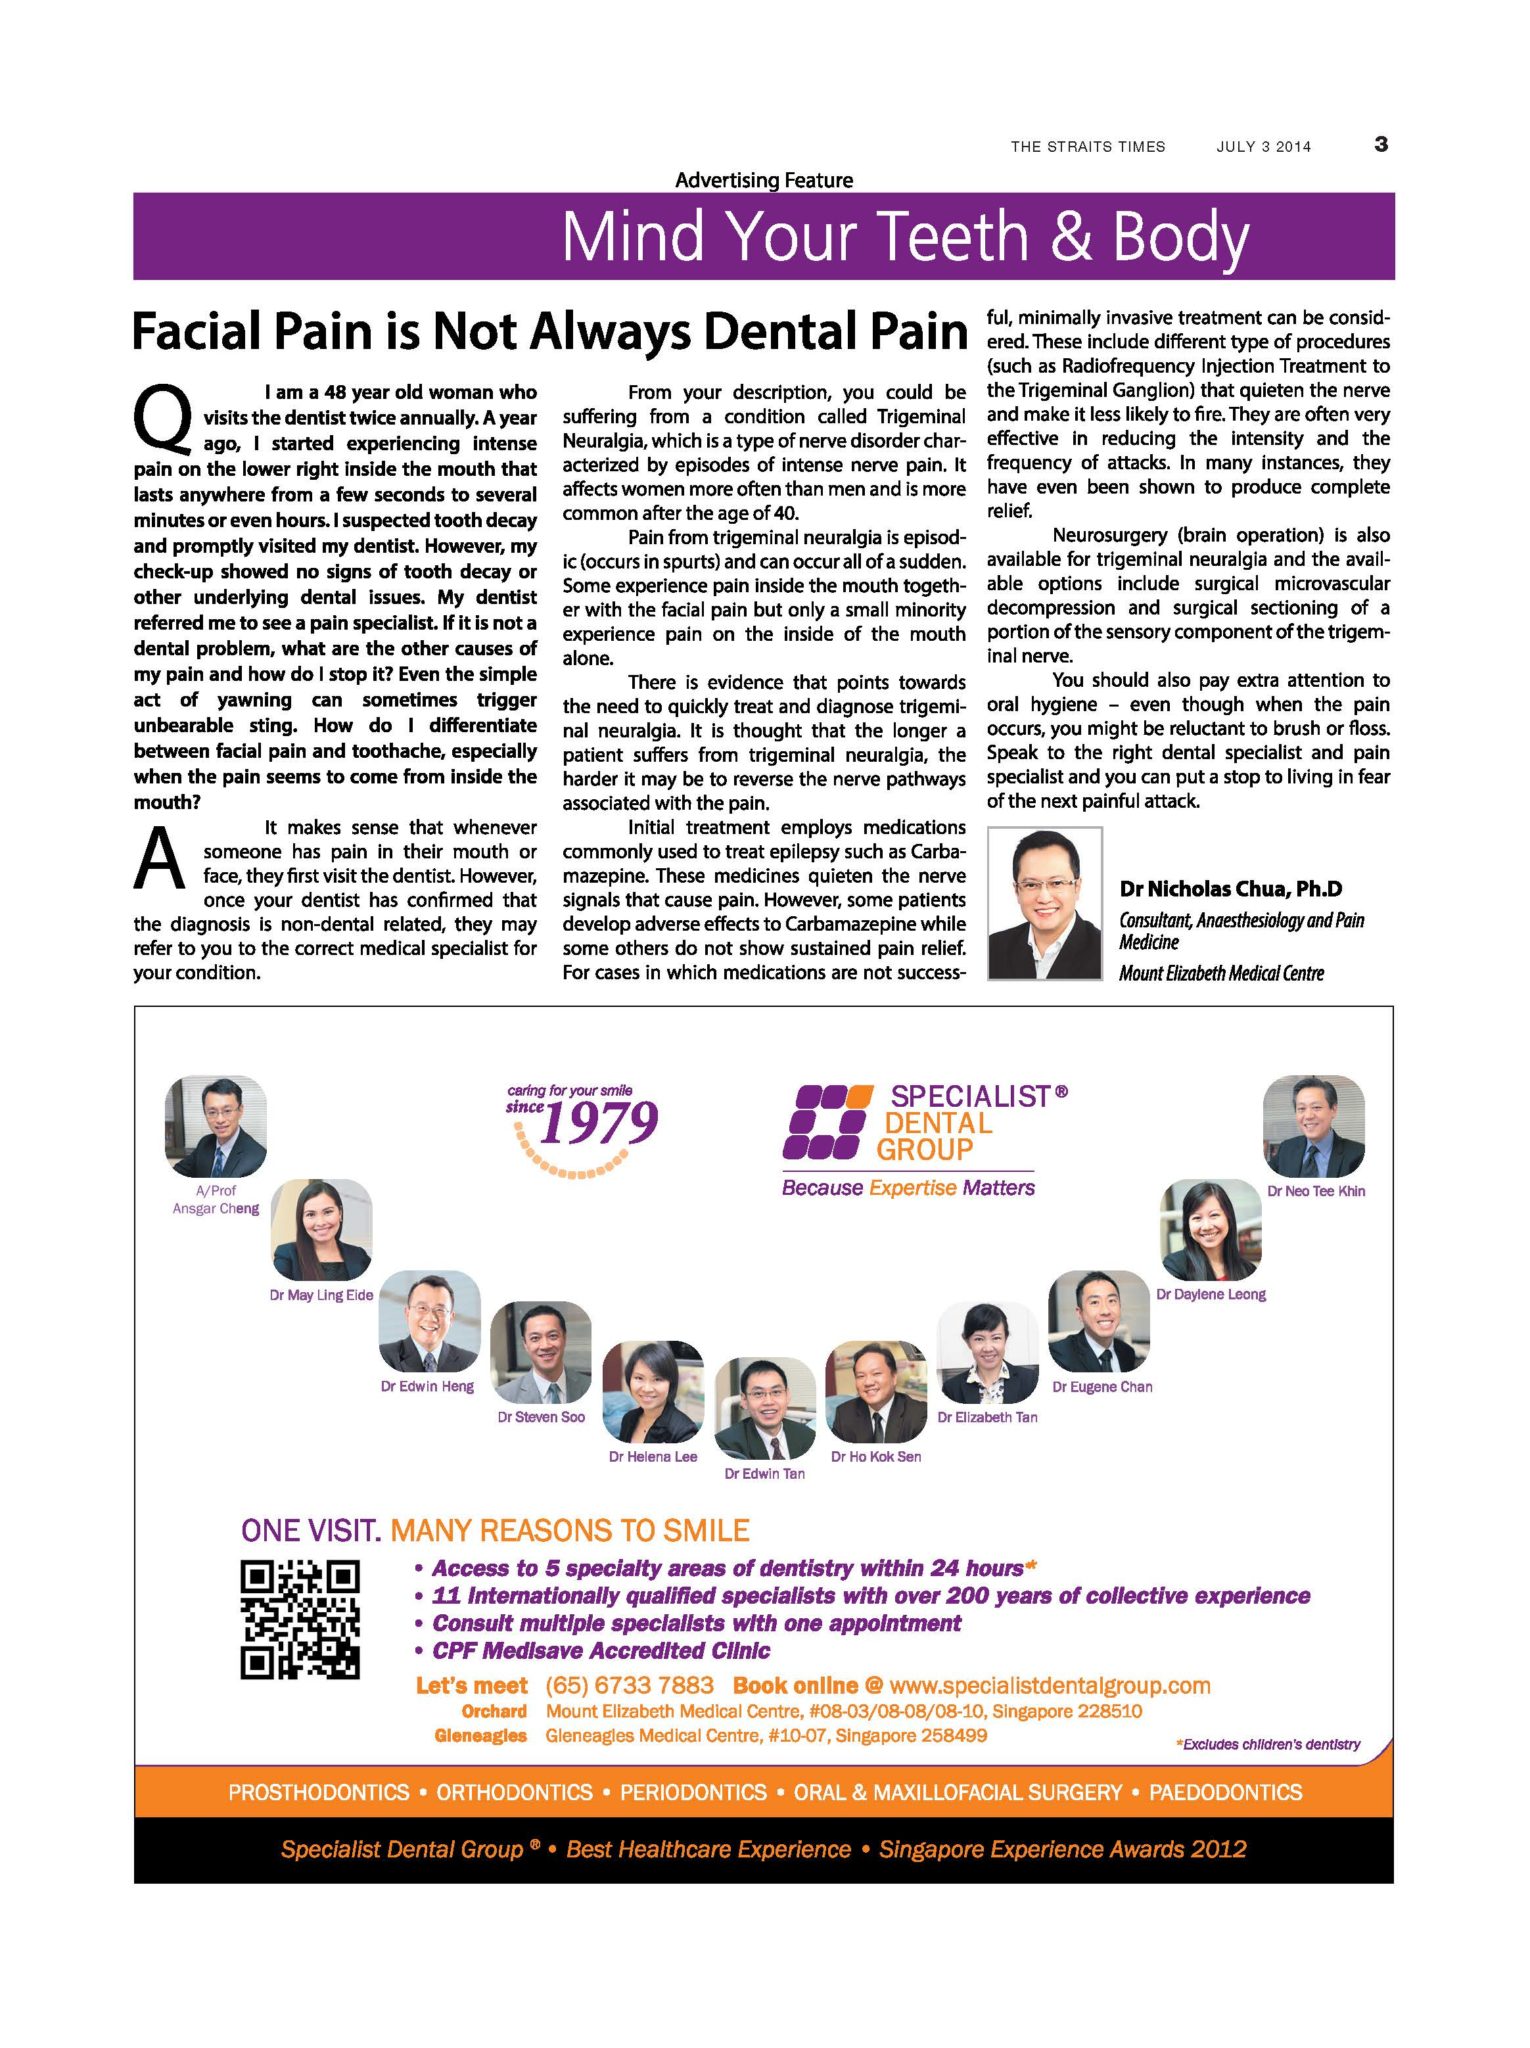 The Straits Times, Mind Your Body, July 3, 2014: “Facial Pain is Not Always Dental Pain”